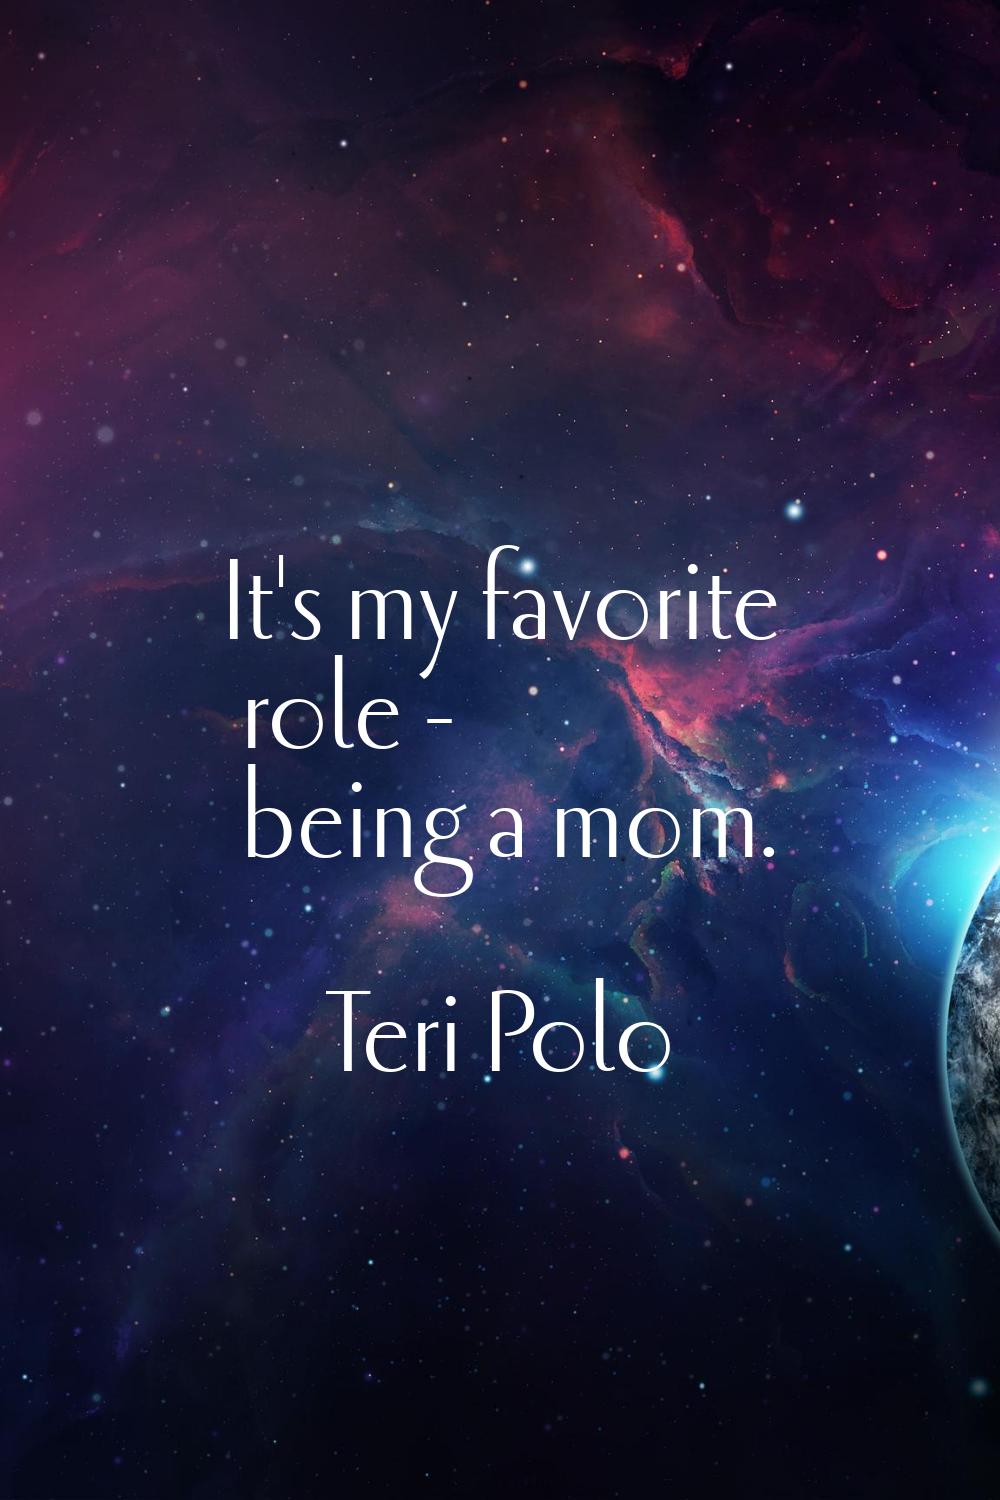 It's my favorite role - being a mom.